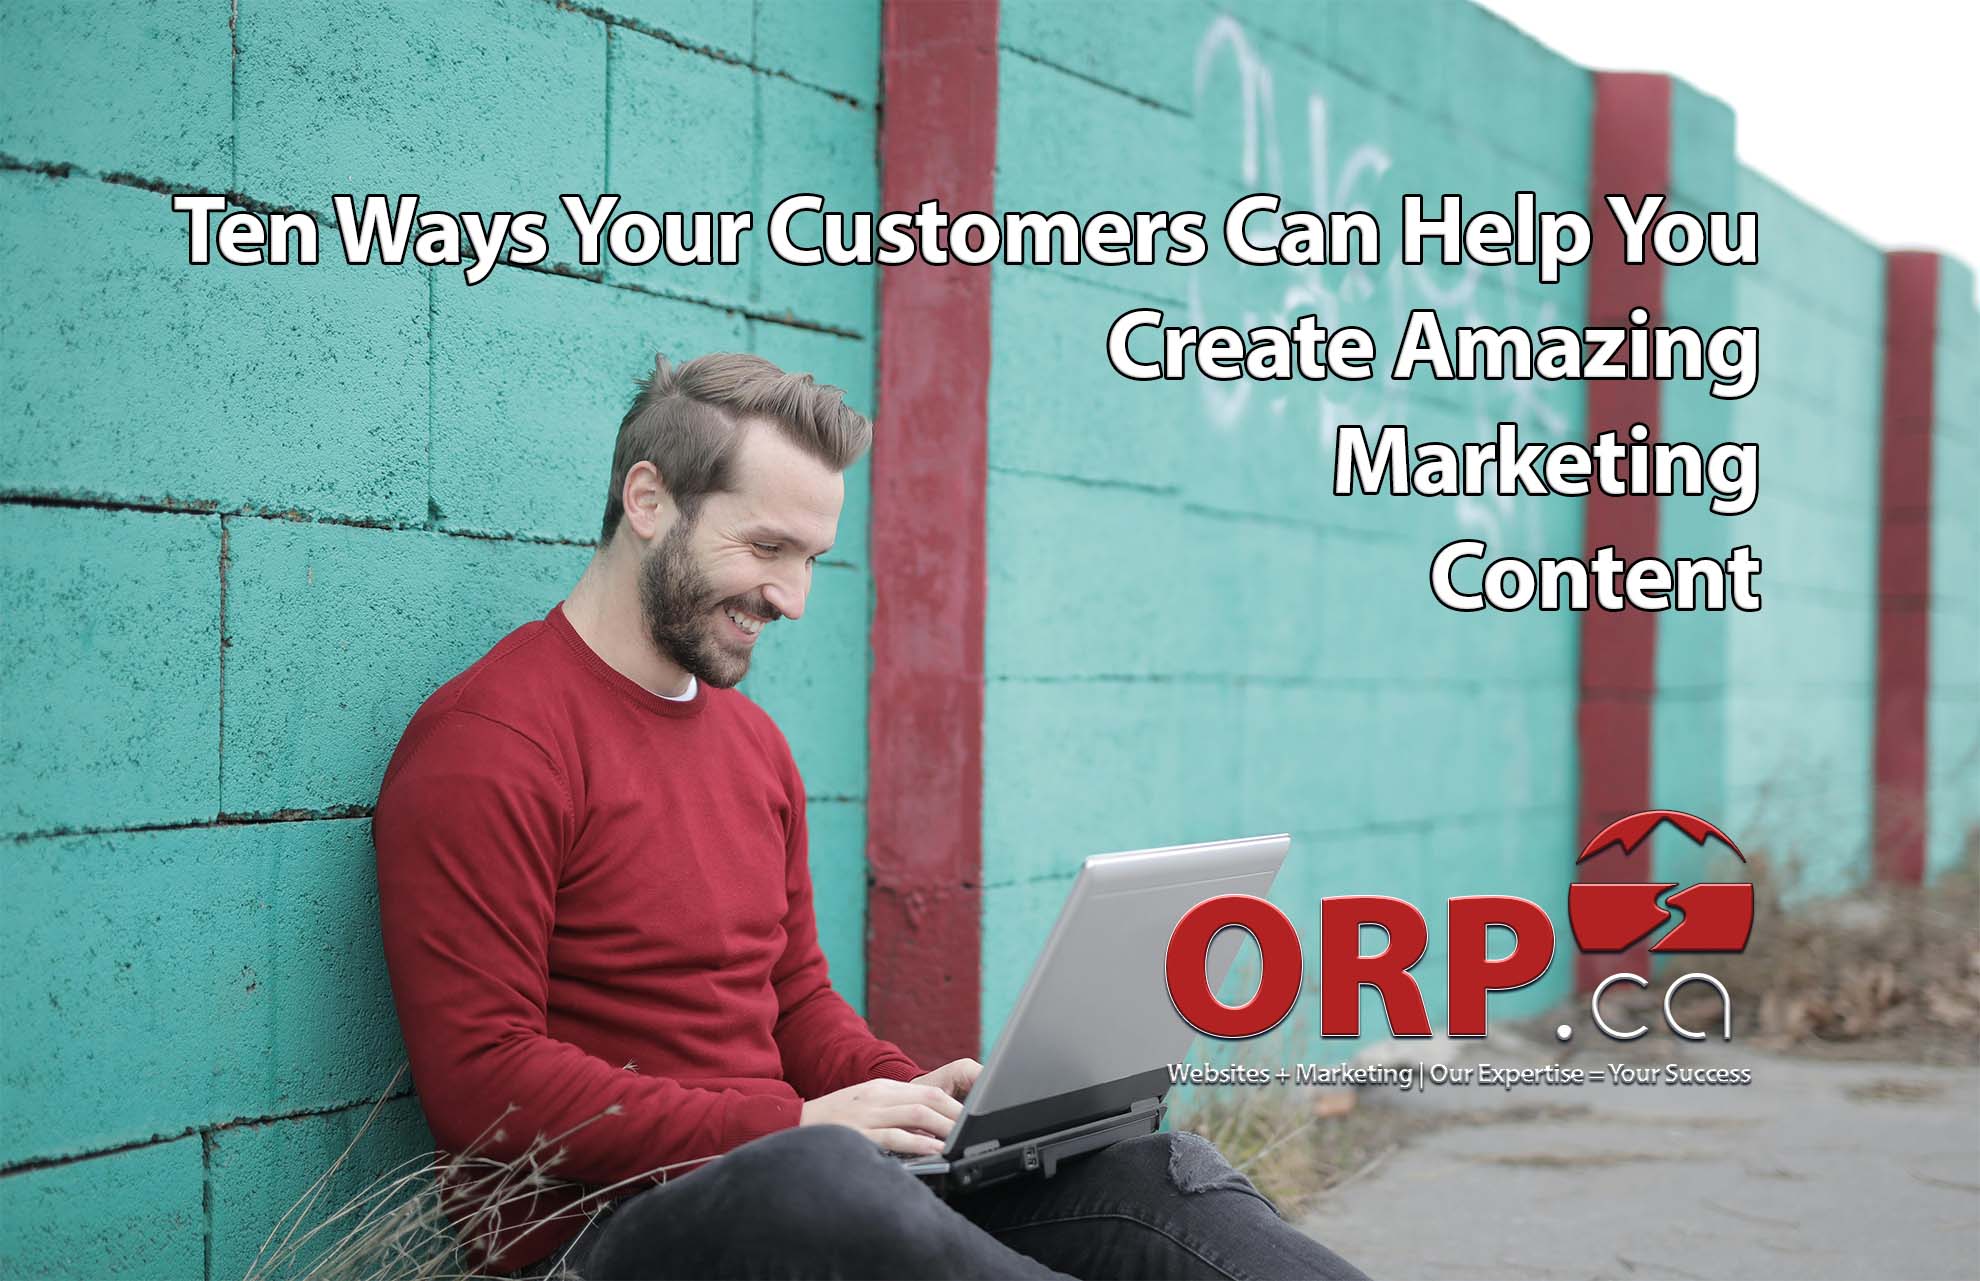 Ten Ways Your Customers Can Help You Create Amazing Marketing Content | A User-Generated Content Article by ORP.ca, Small Business Digital Marketing Specialists